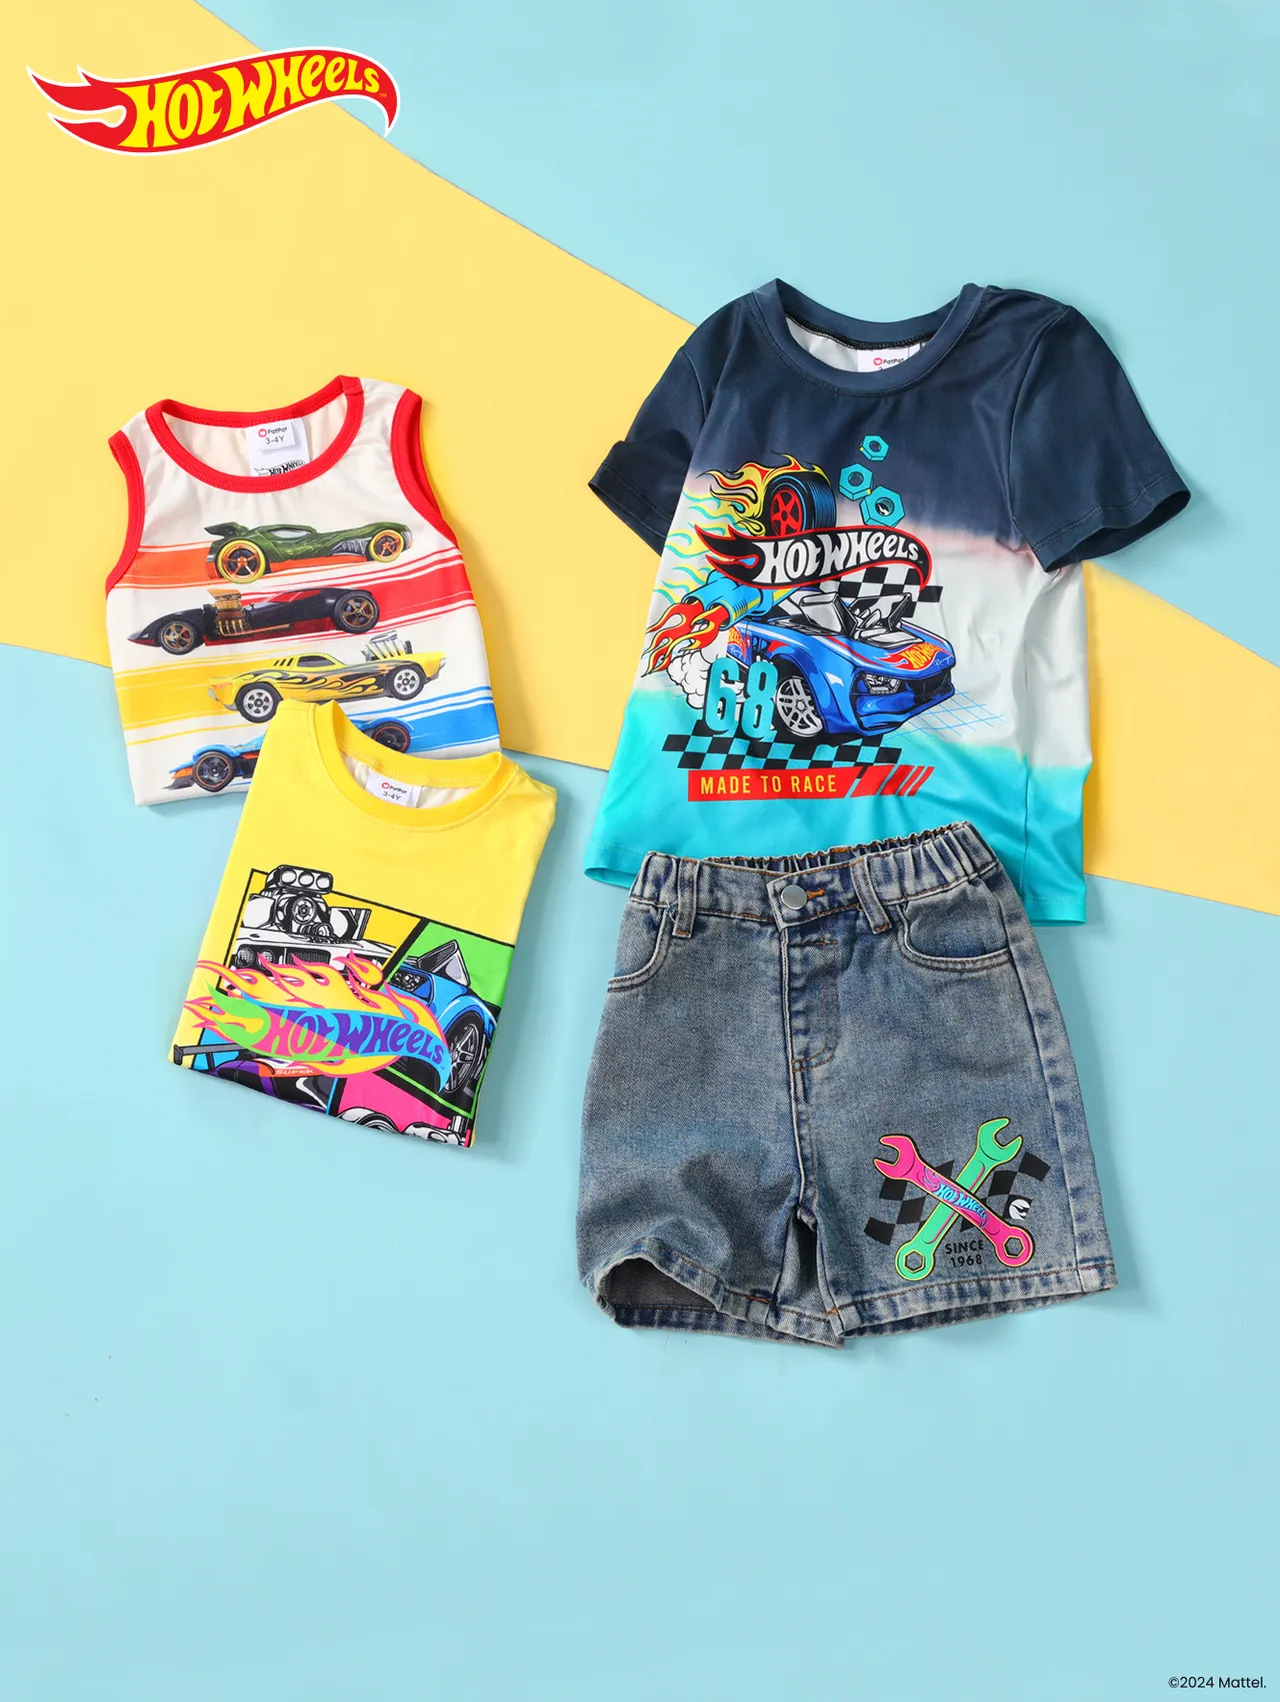 Click it to join Hot Wheels Boys Fashion activity